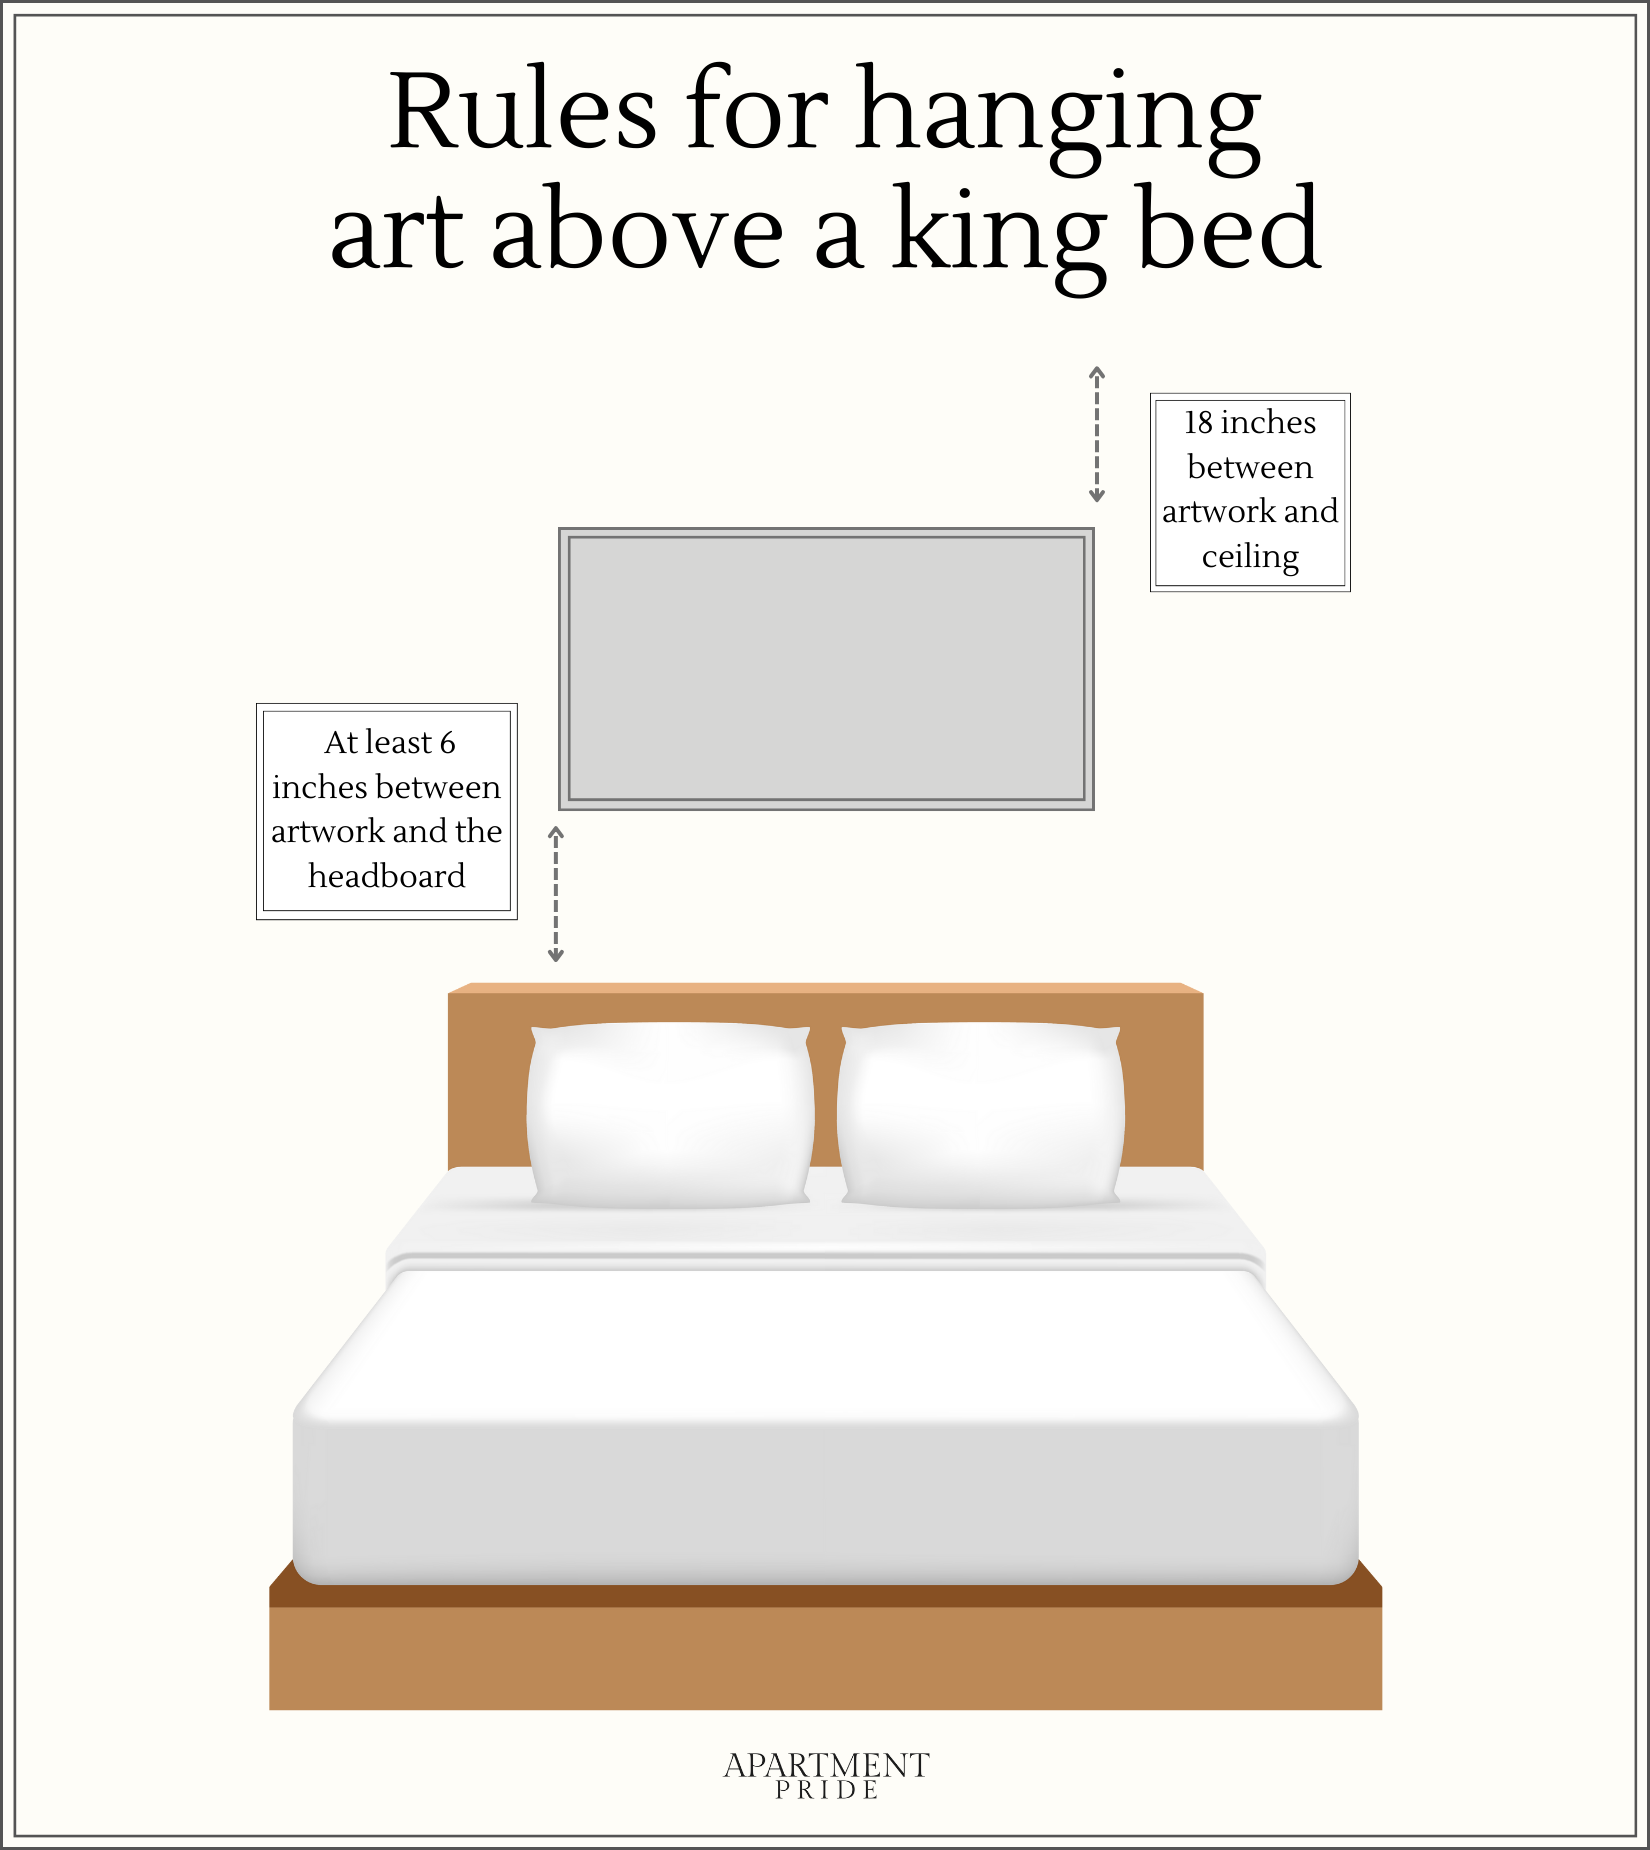 Rules for hanging art above a king size bed